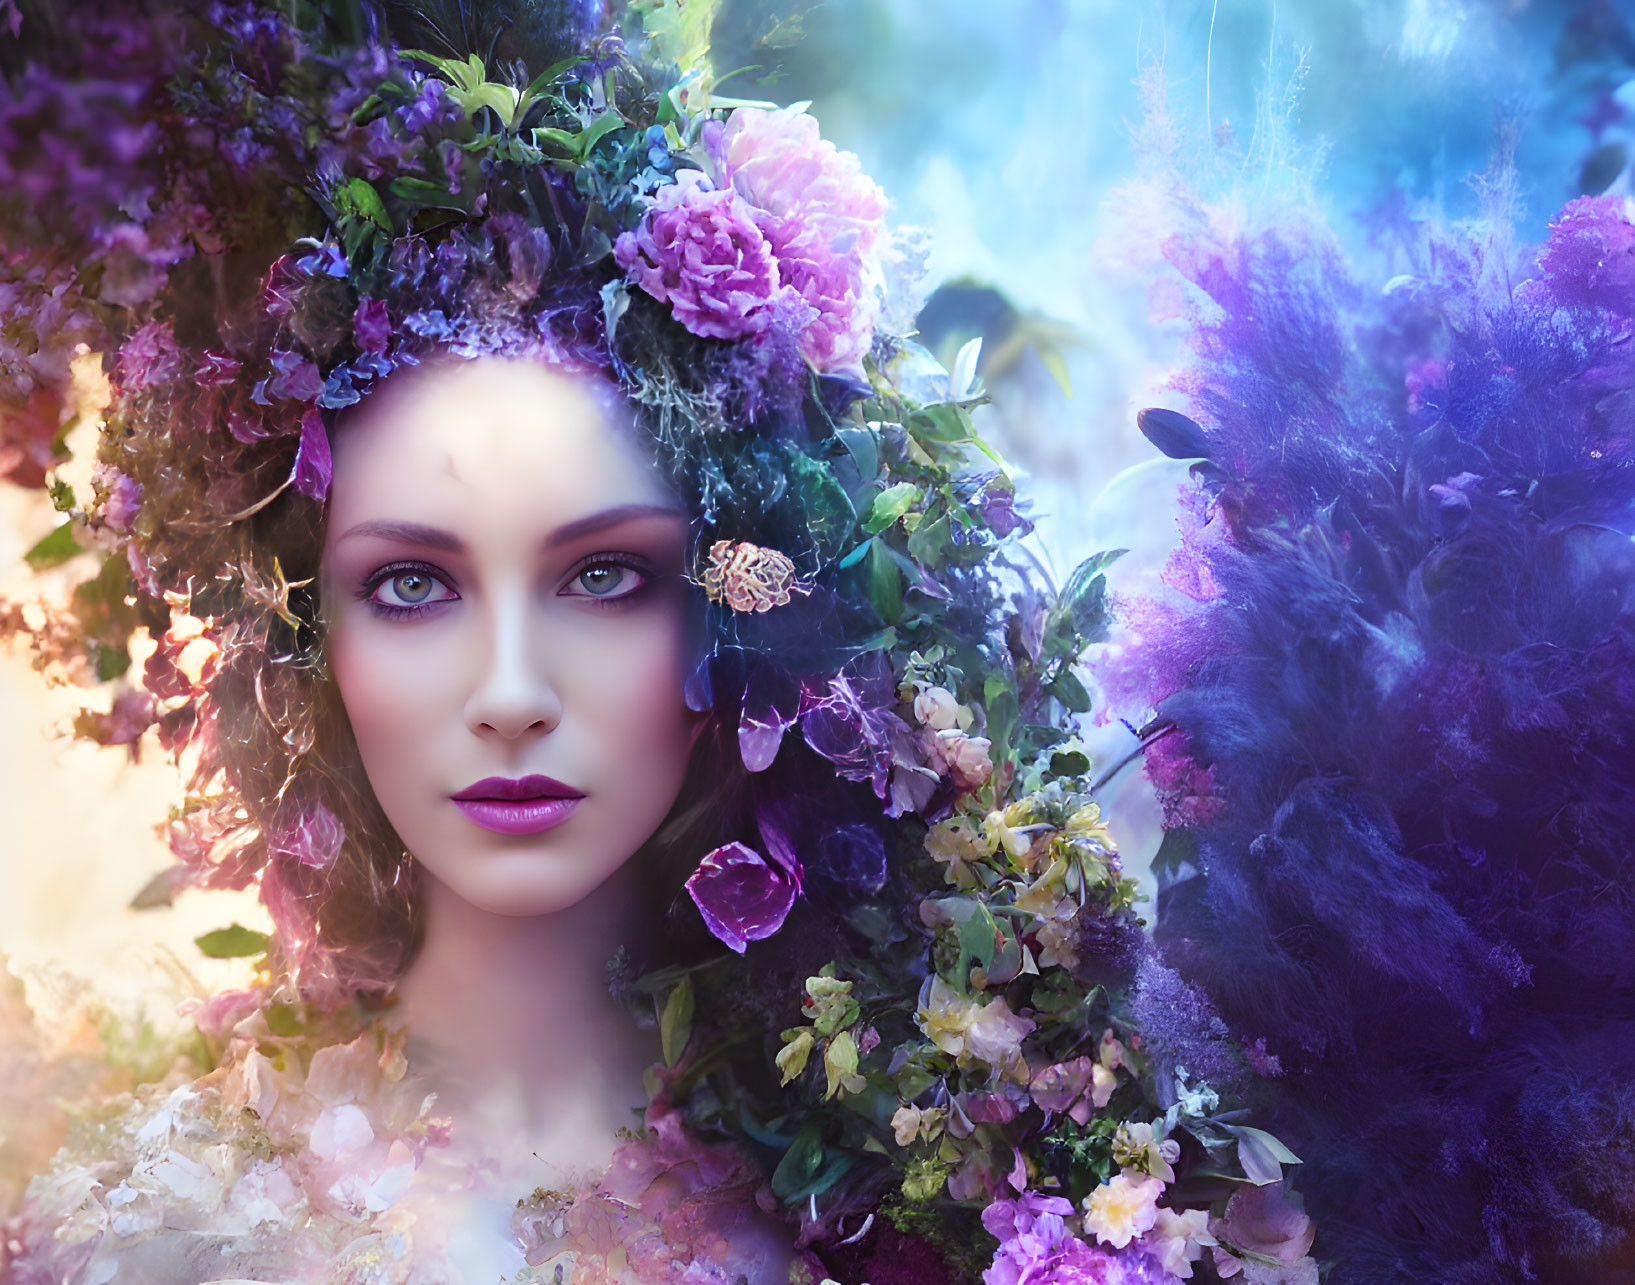 Portrait of a woman with violet eyes and floral headdress in mystical purple haze